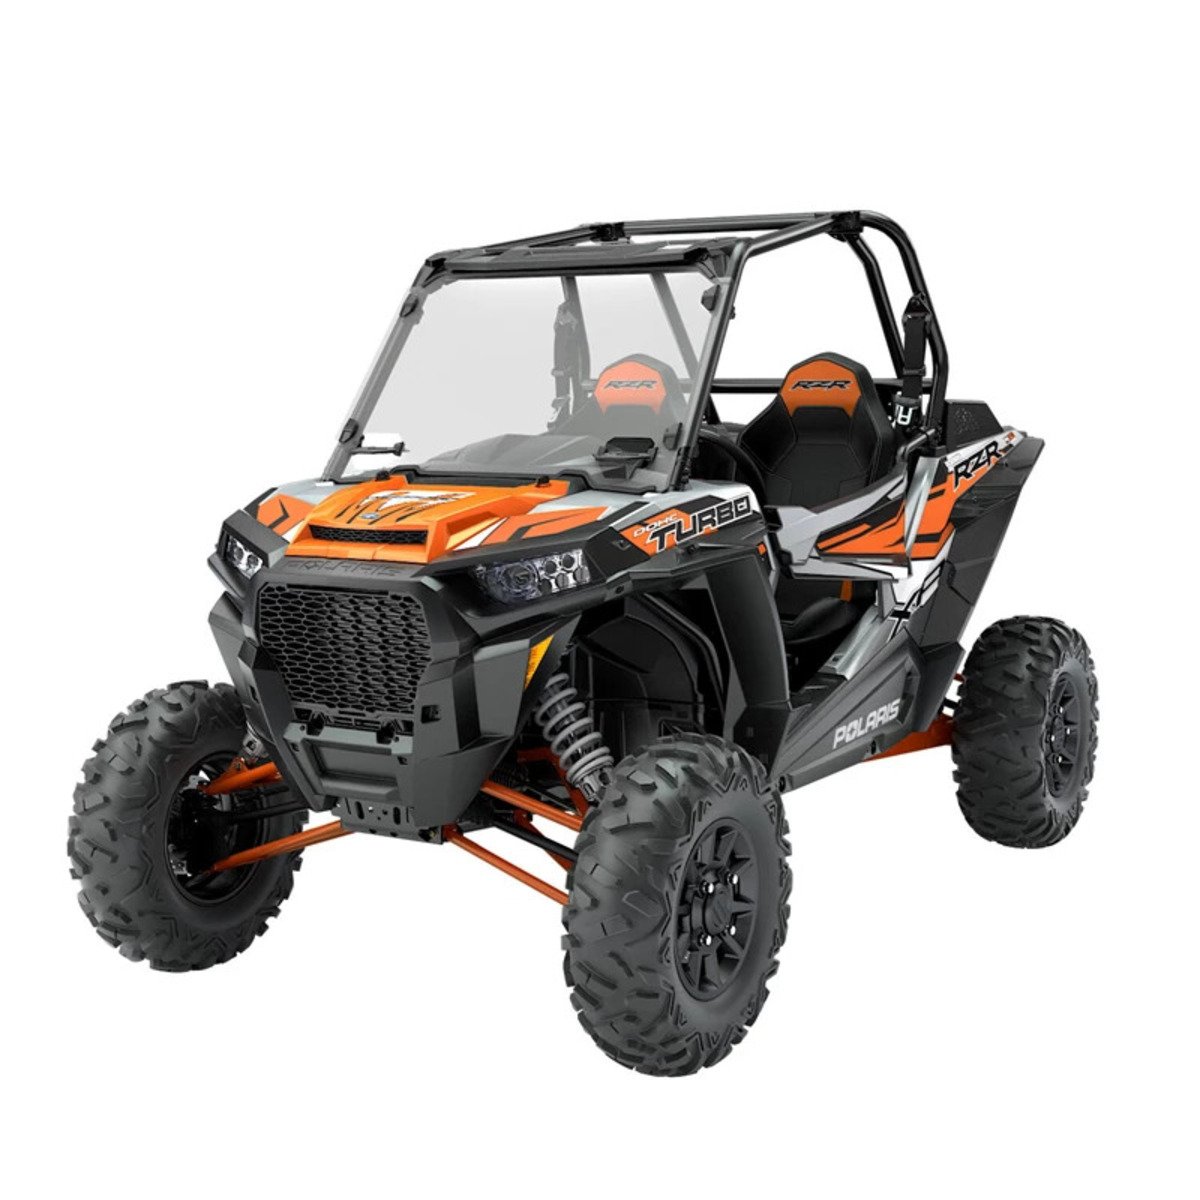 Polaris RZR Polycarbonate Vented Full Windshield - Clear